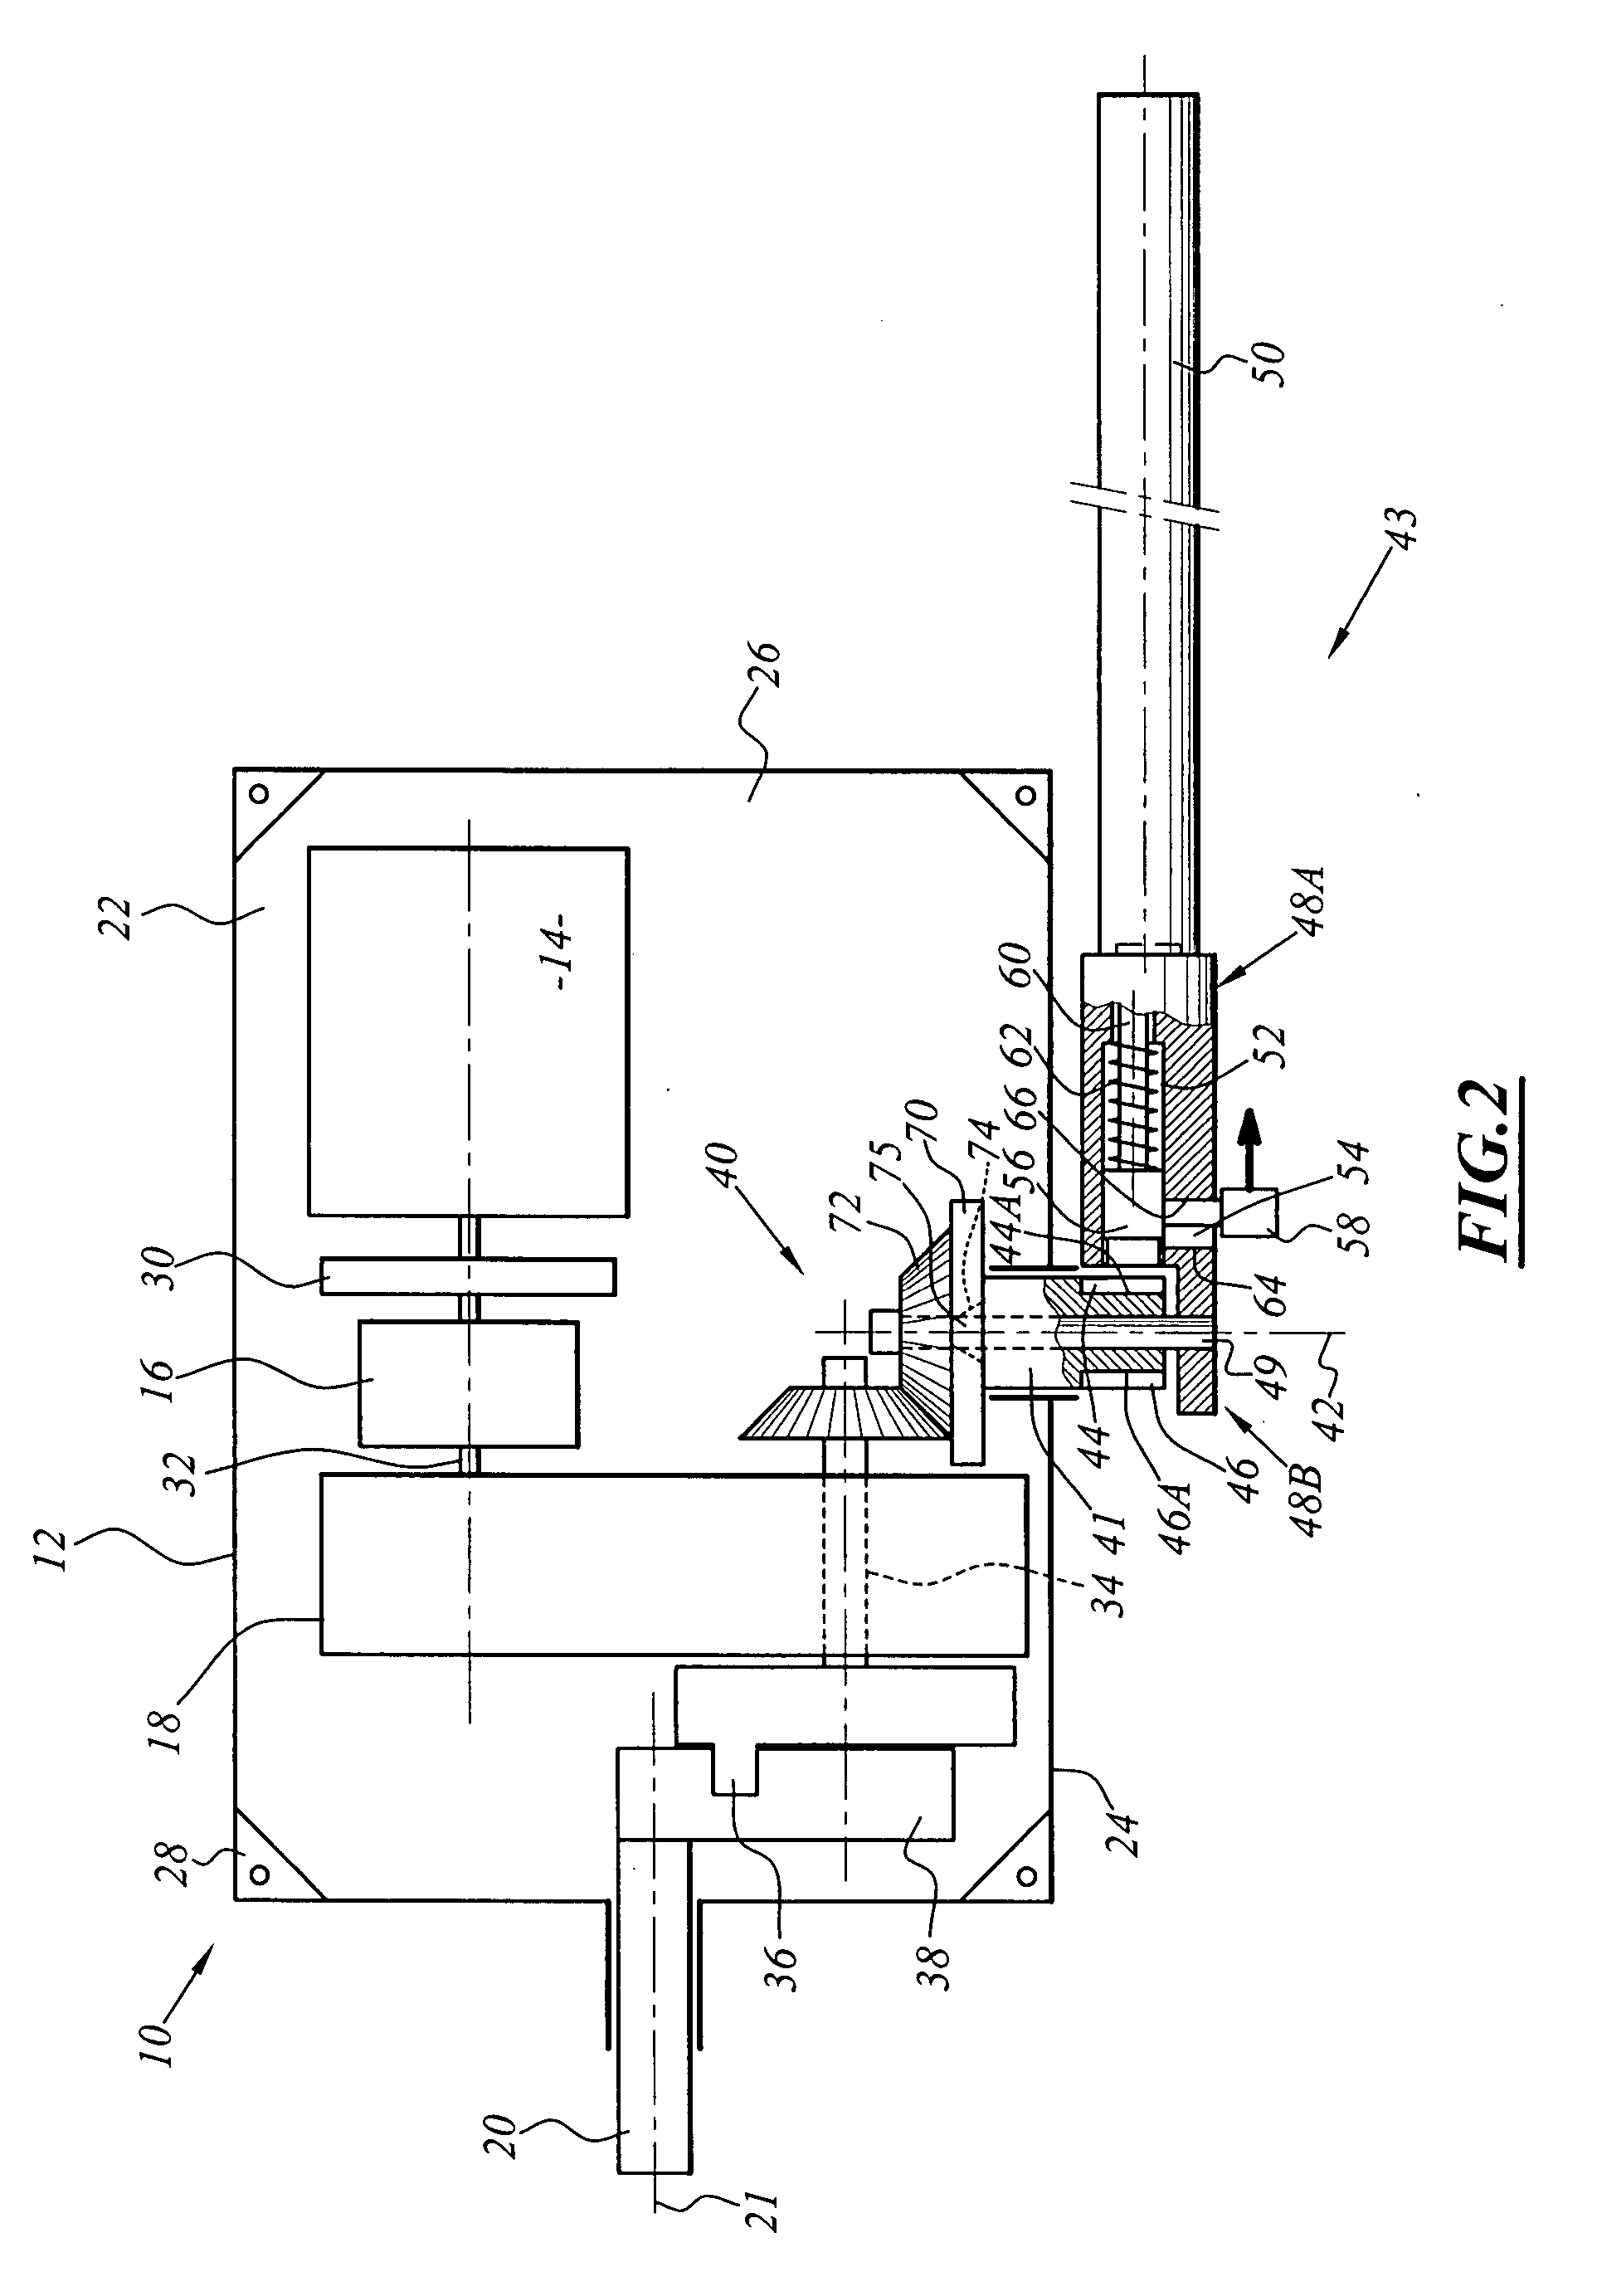 Switch points maneuvering device with manual control